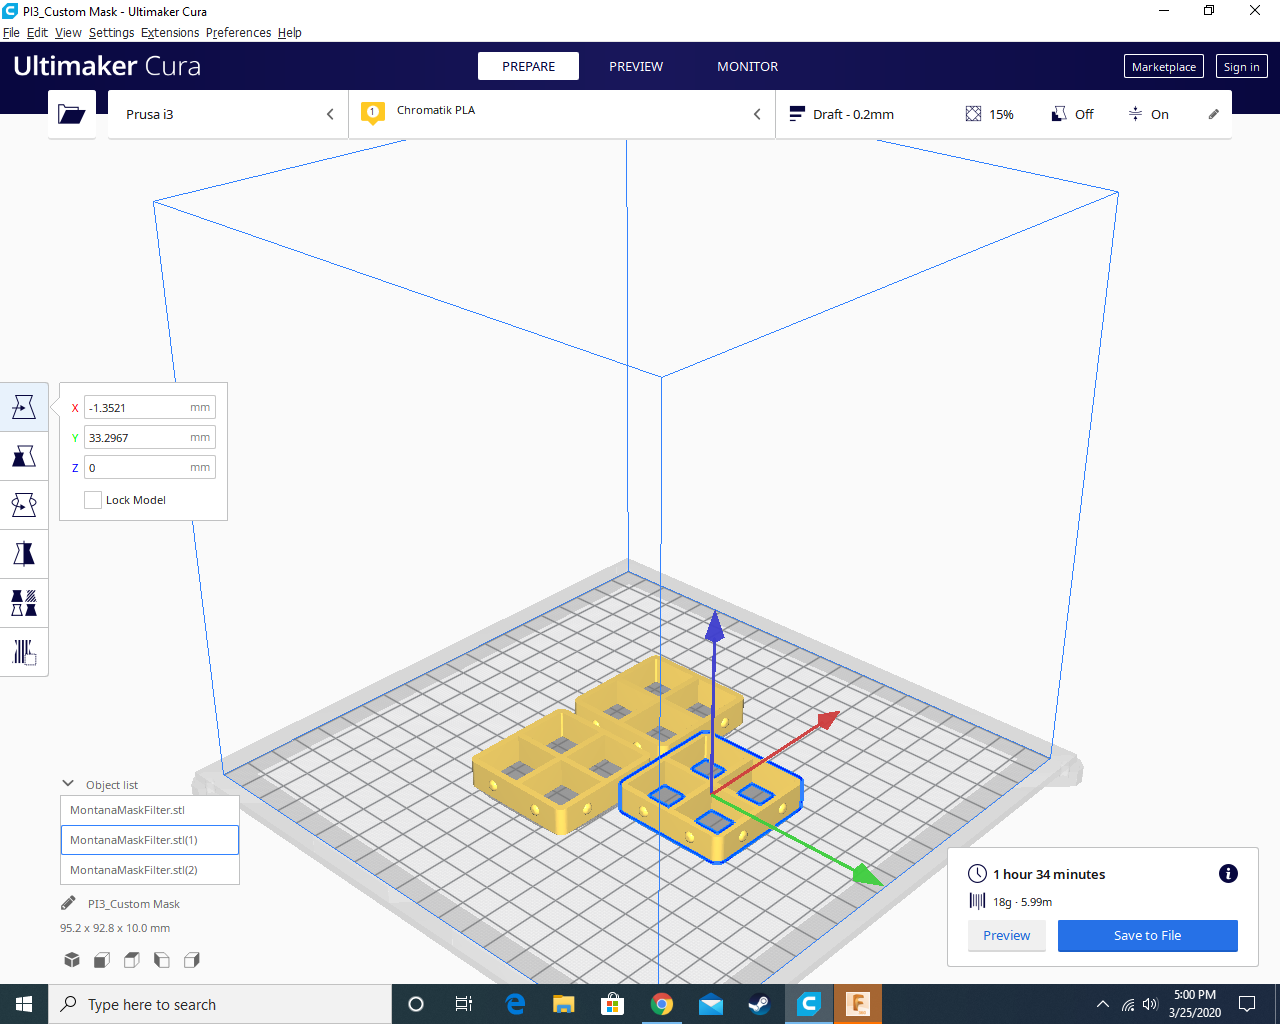 screenshot of cura ultimaker application with filters loaded